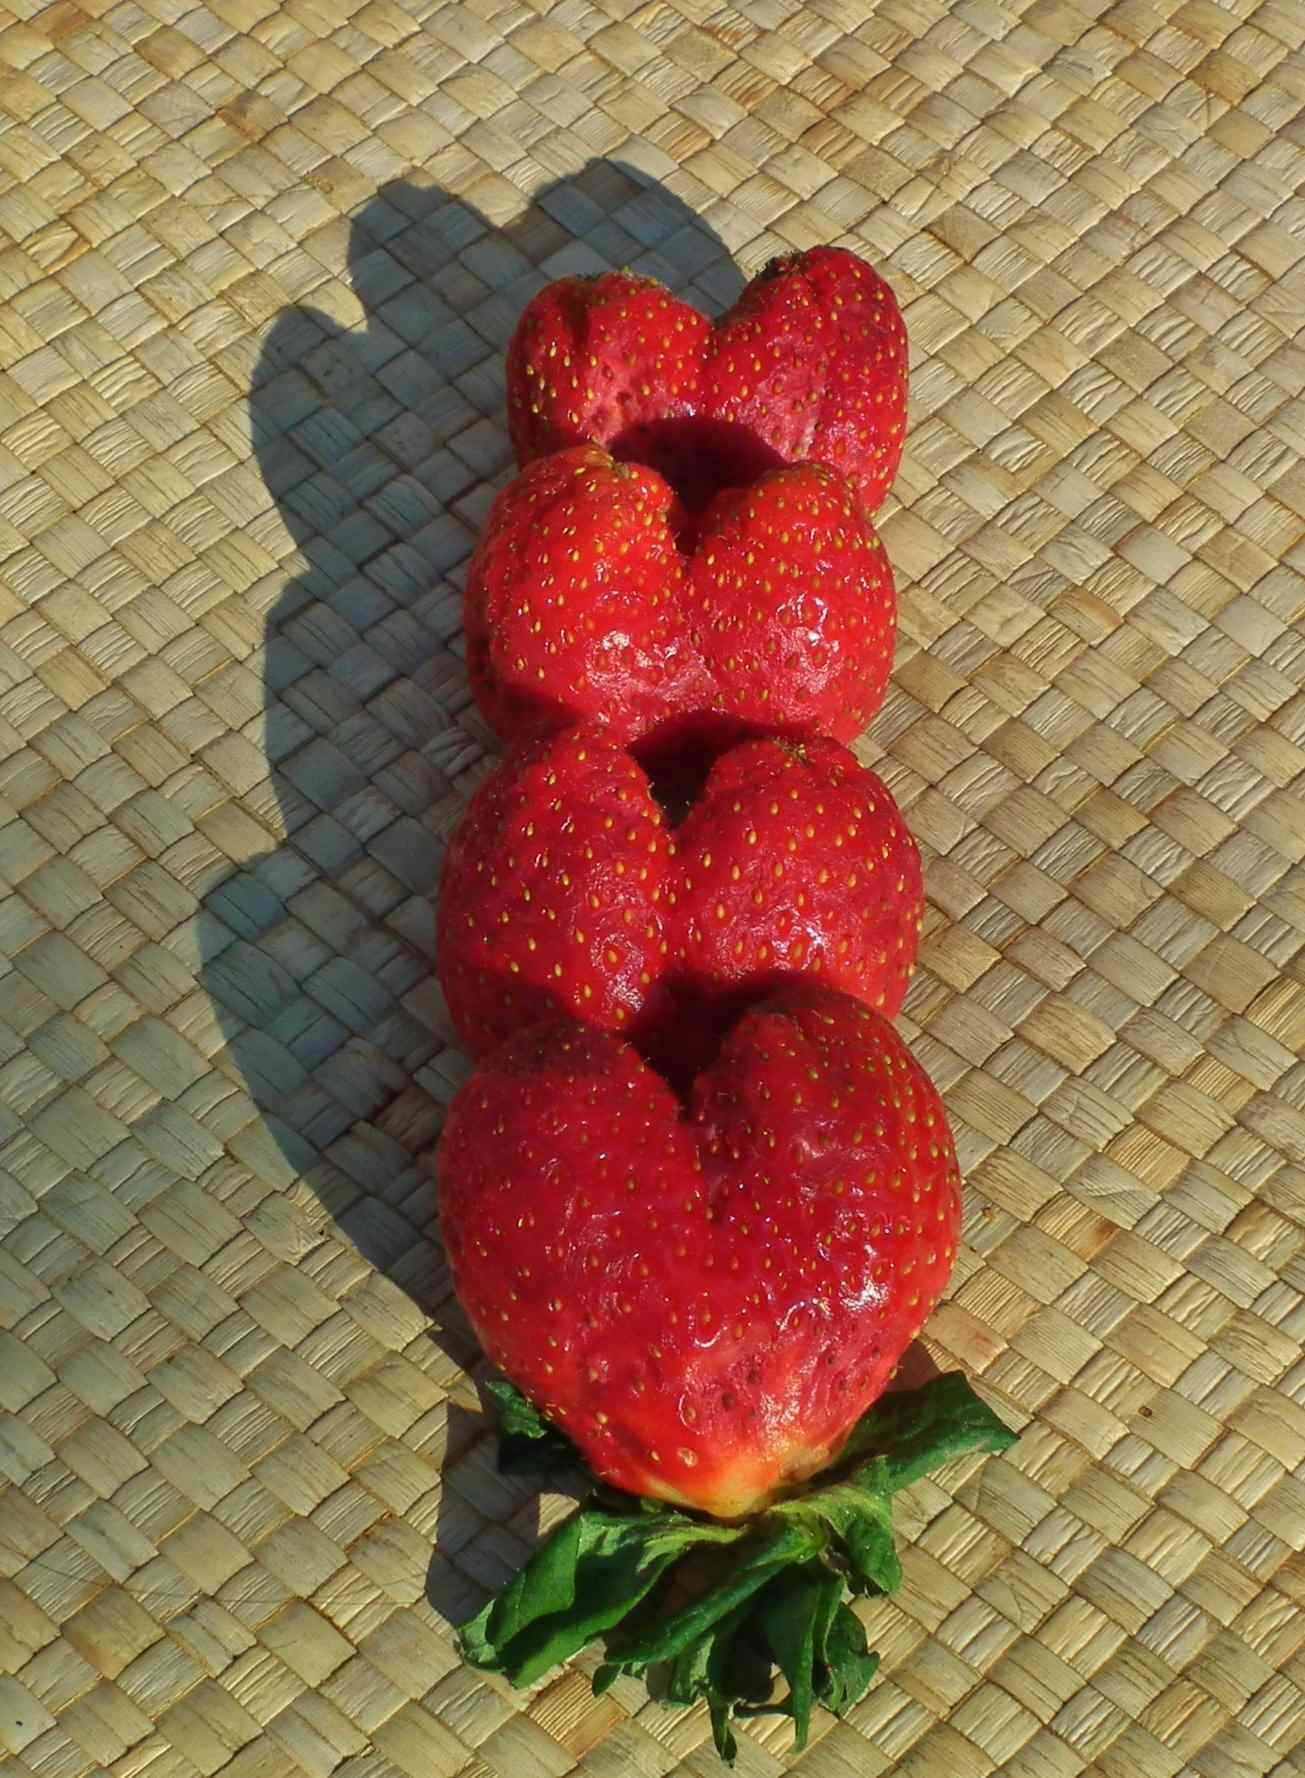 Love Strawberries - Food & Drink, Fruit | Strawberry | Red | Healthy | Love | Heart